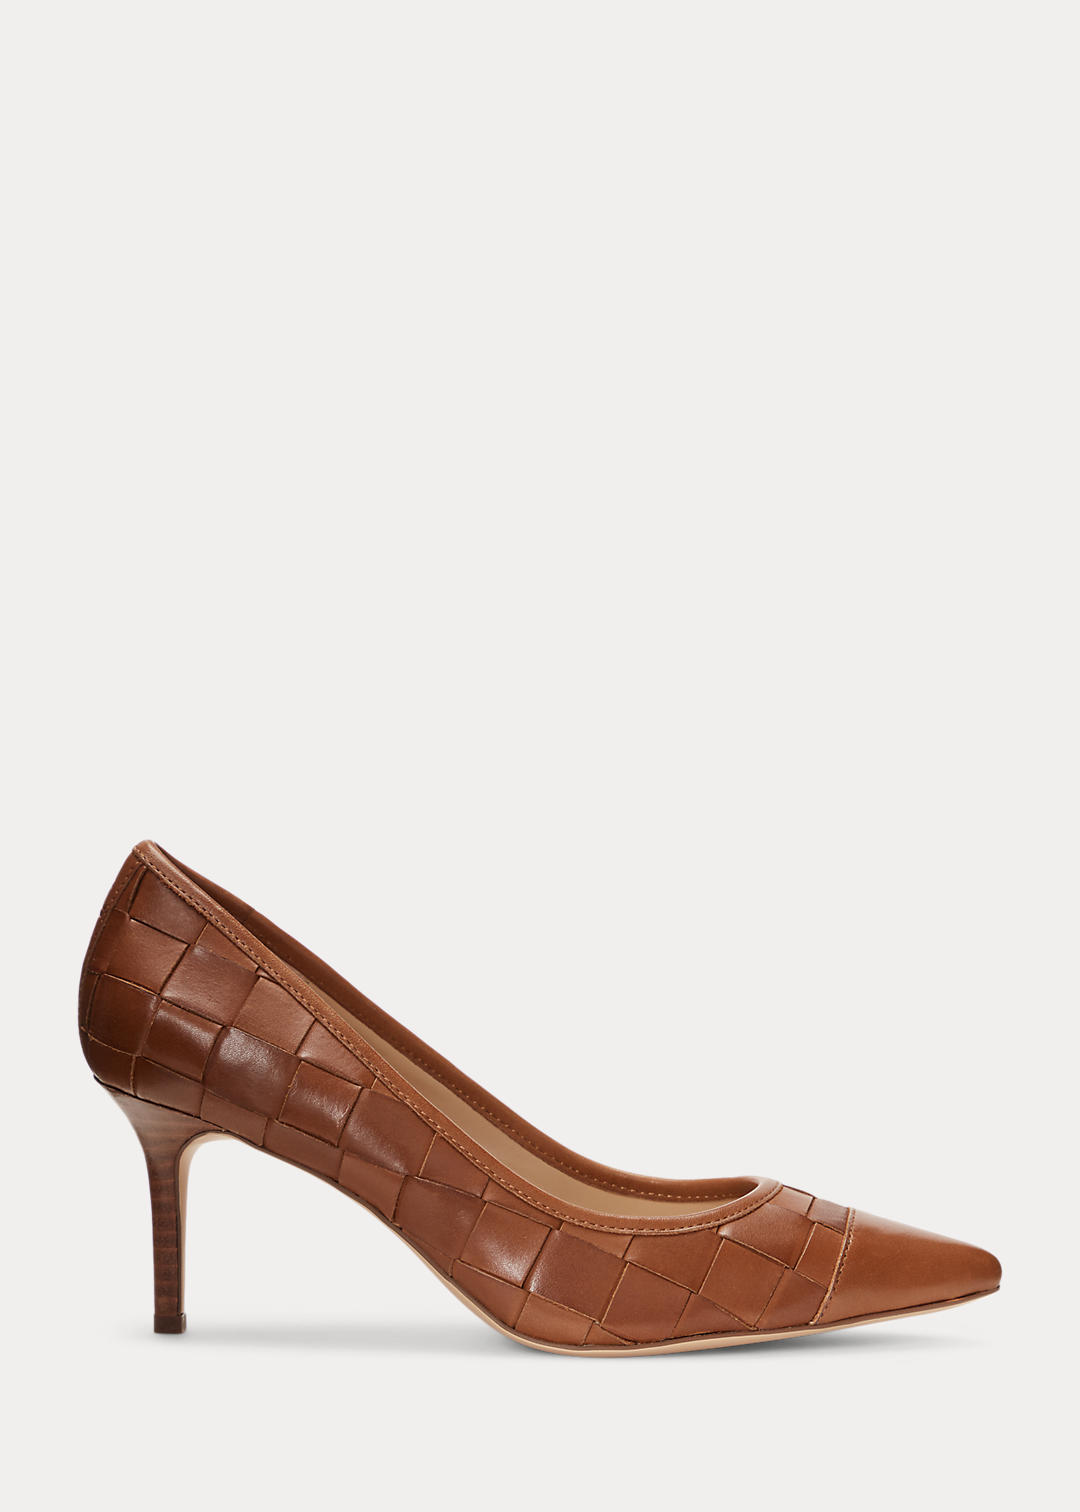 Lanette Woven Leather Pump